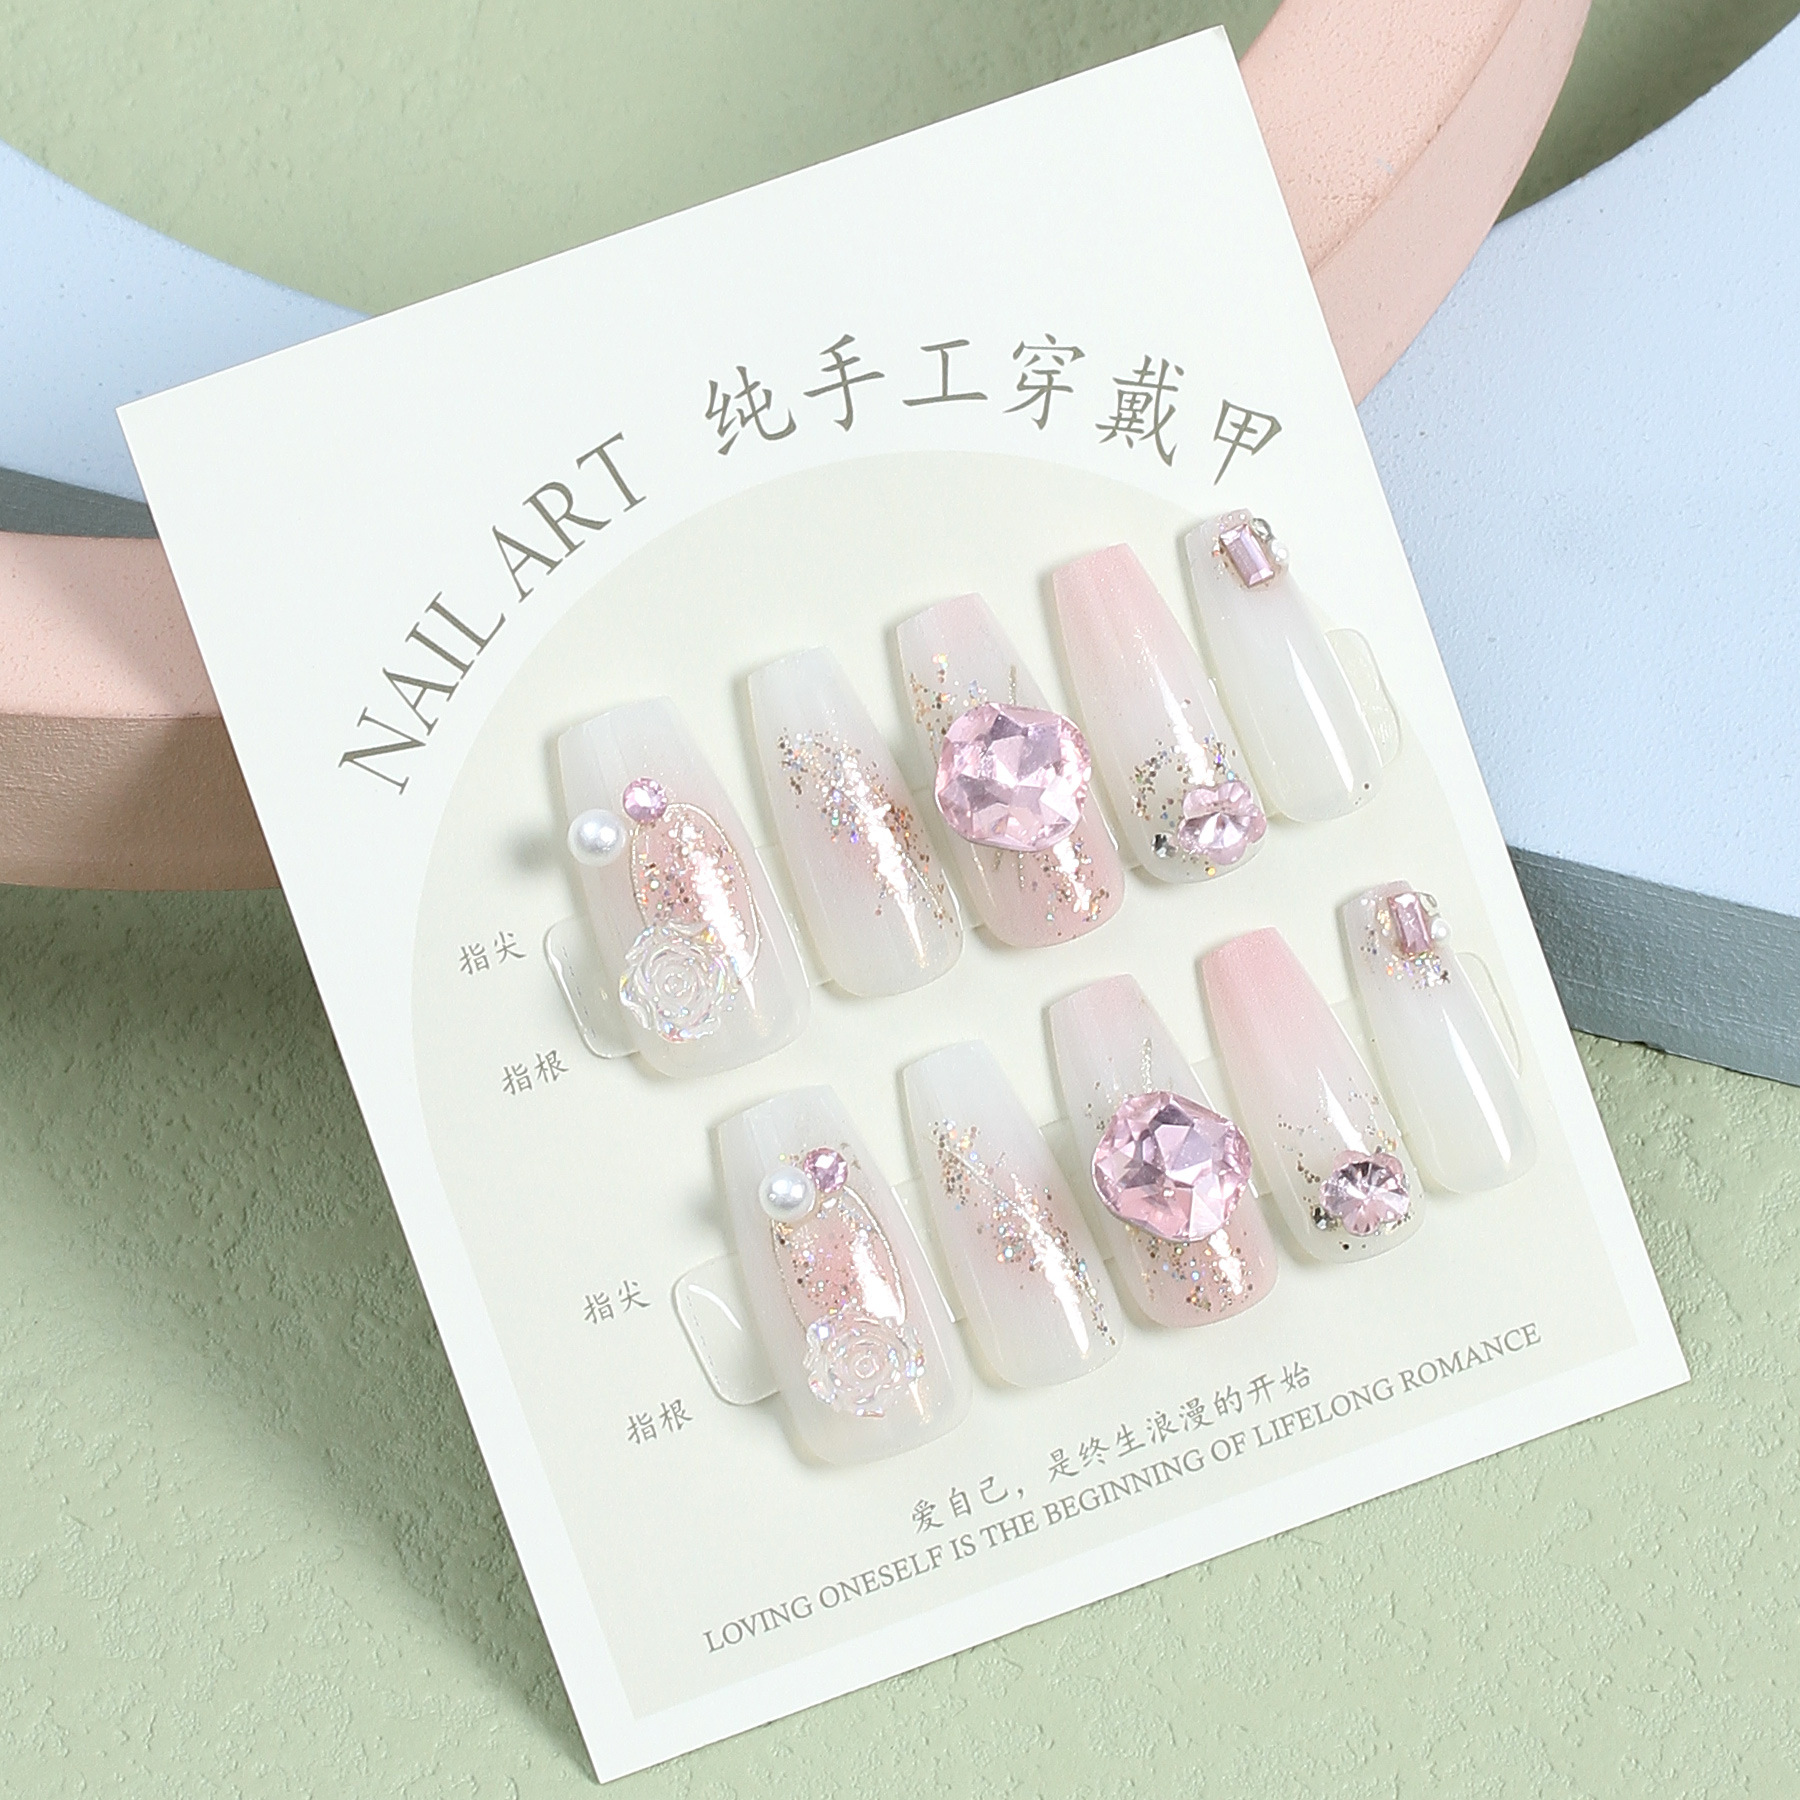 Best-Seller on Douyin 10 Pieces Large Bright Crystal Hand-Worn Nail Skin Color Blush Flash Long Ladder Manicure Fake Nails